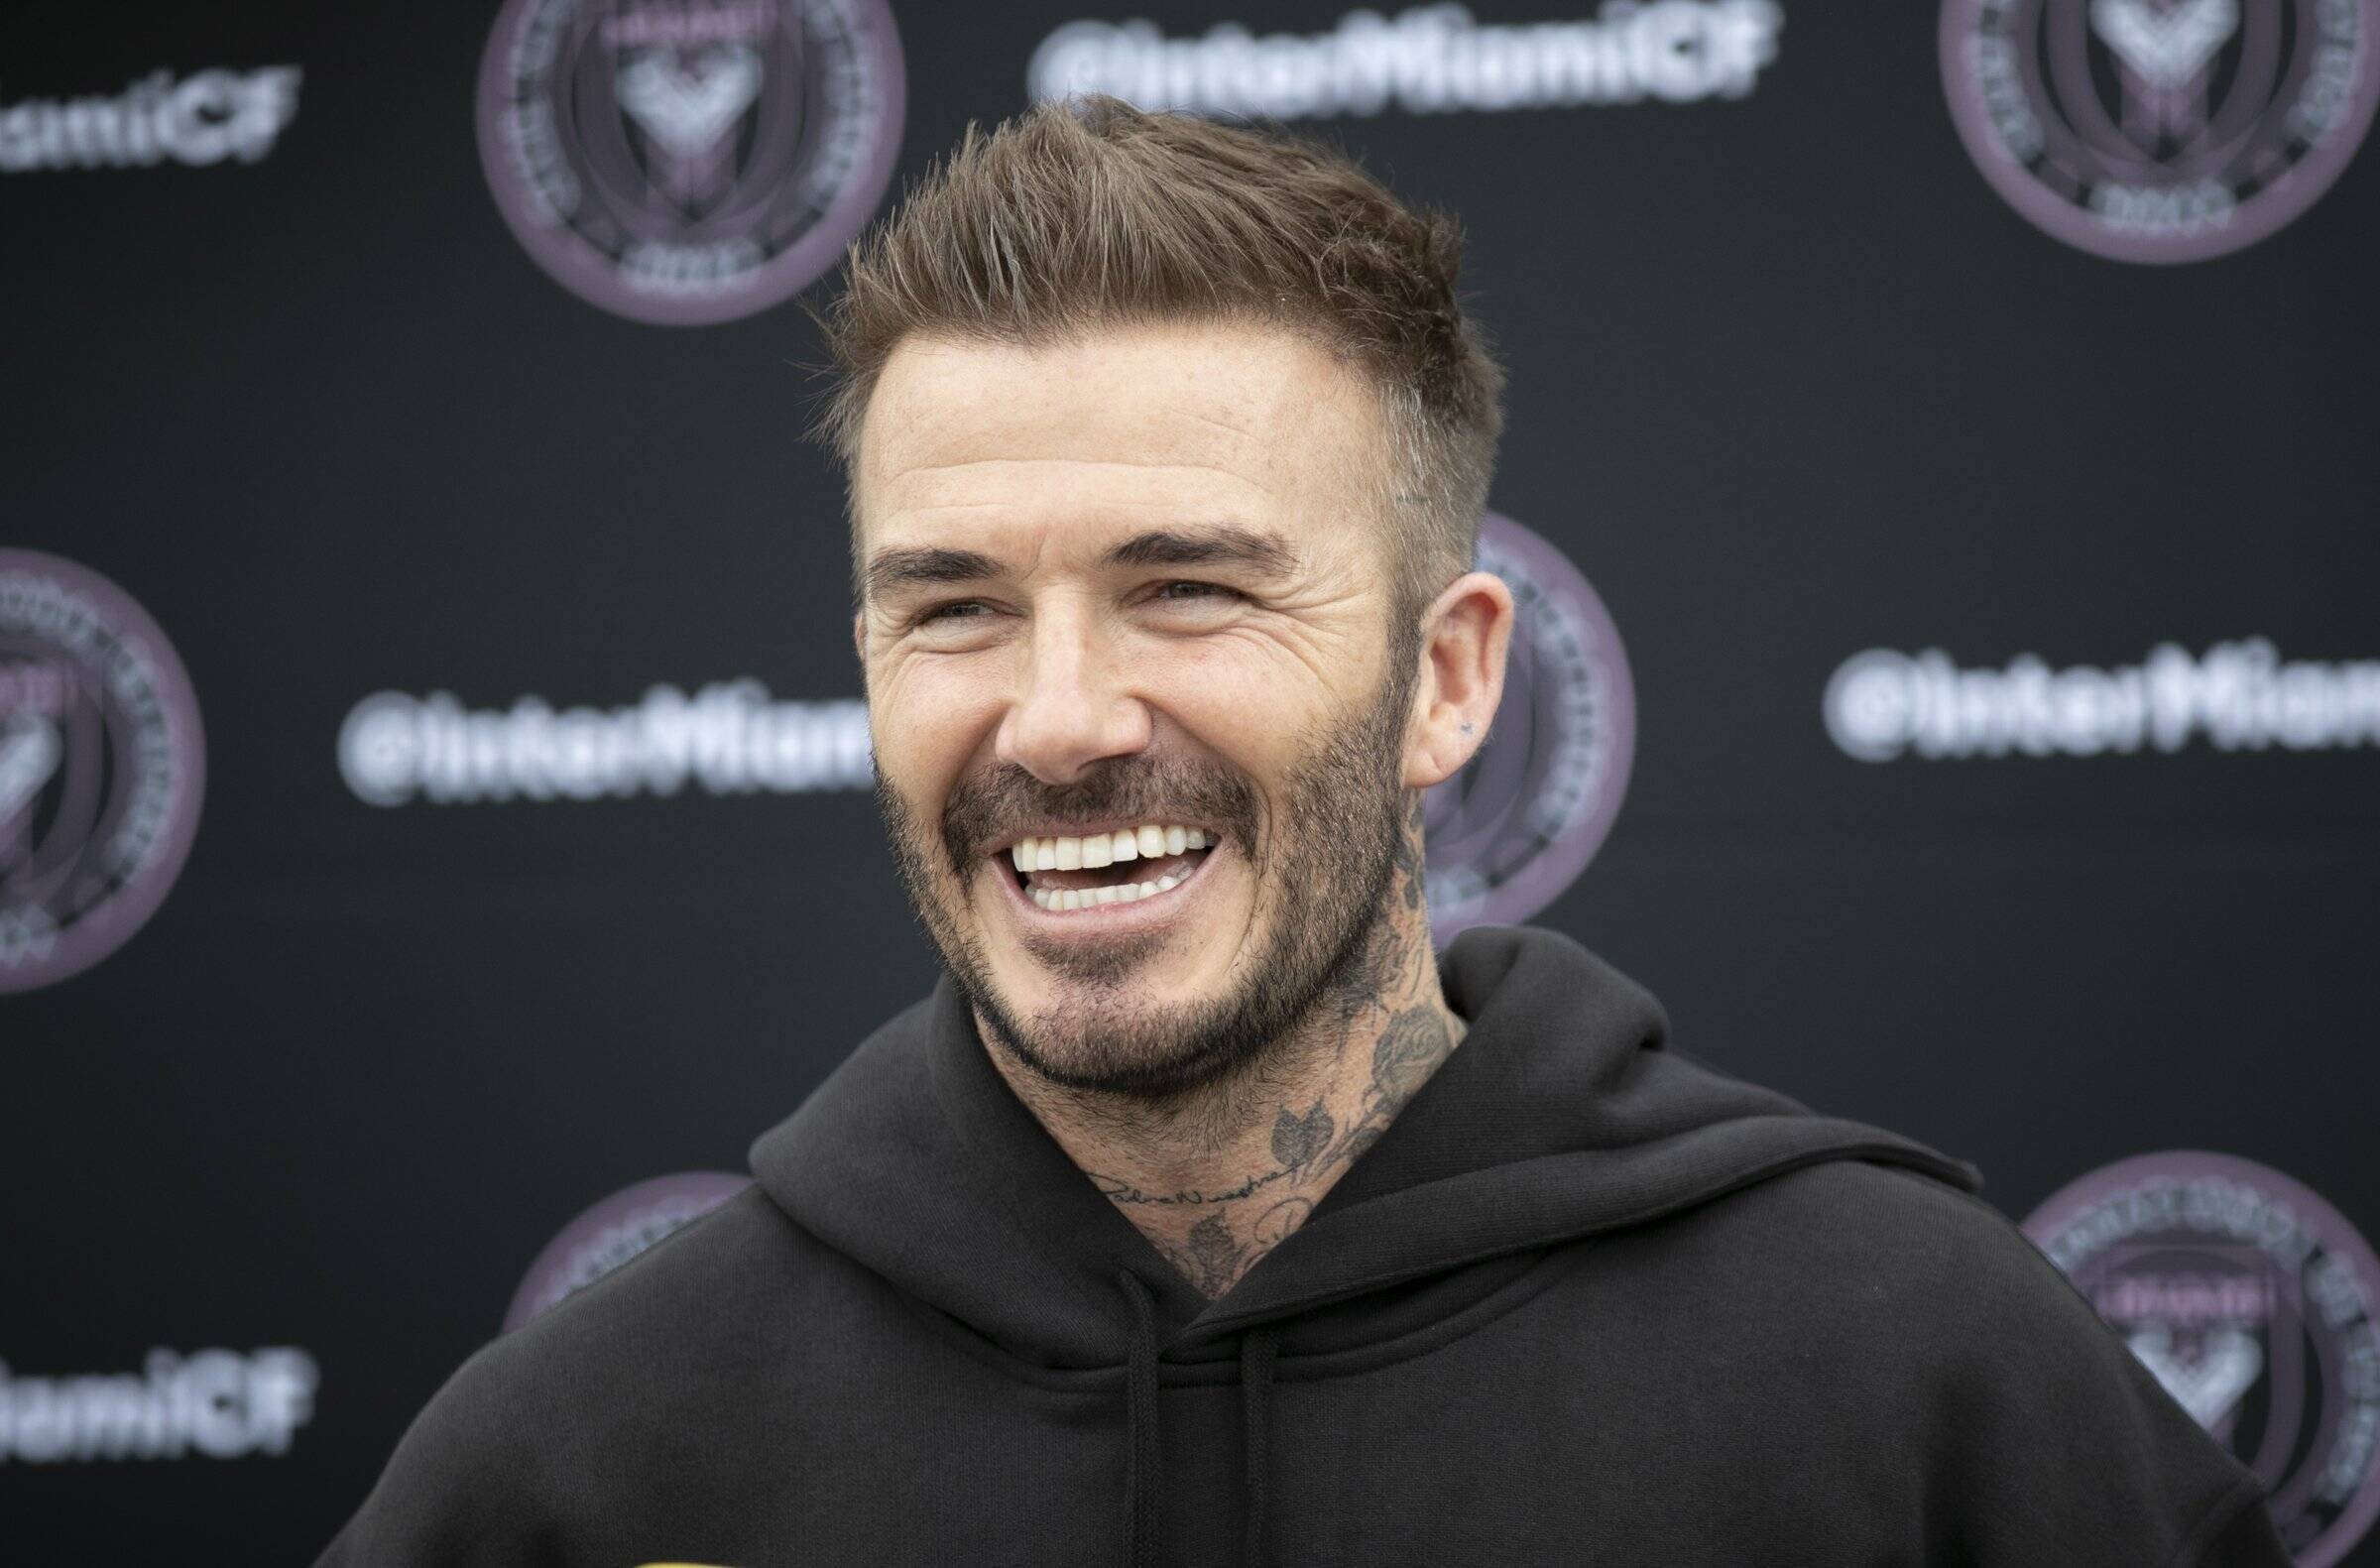 David Beckham’s Inter Miami will face sanctions due to the club violating roster rules in 2020